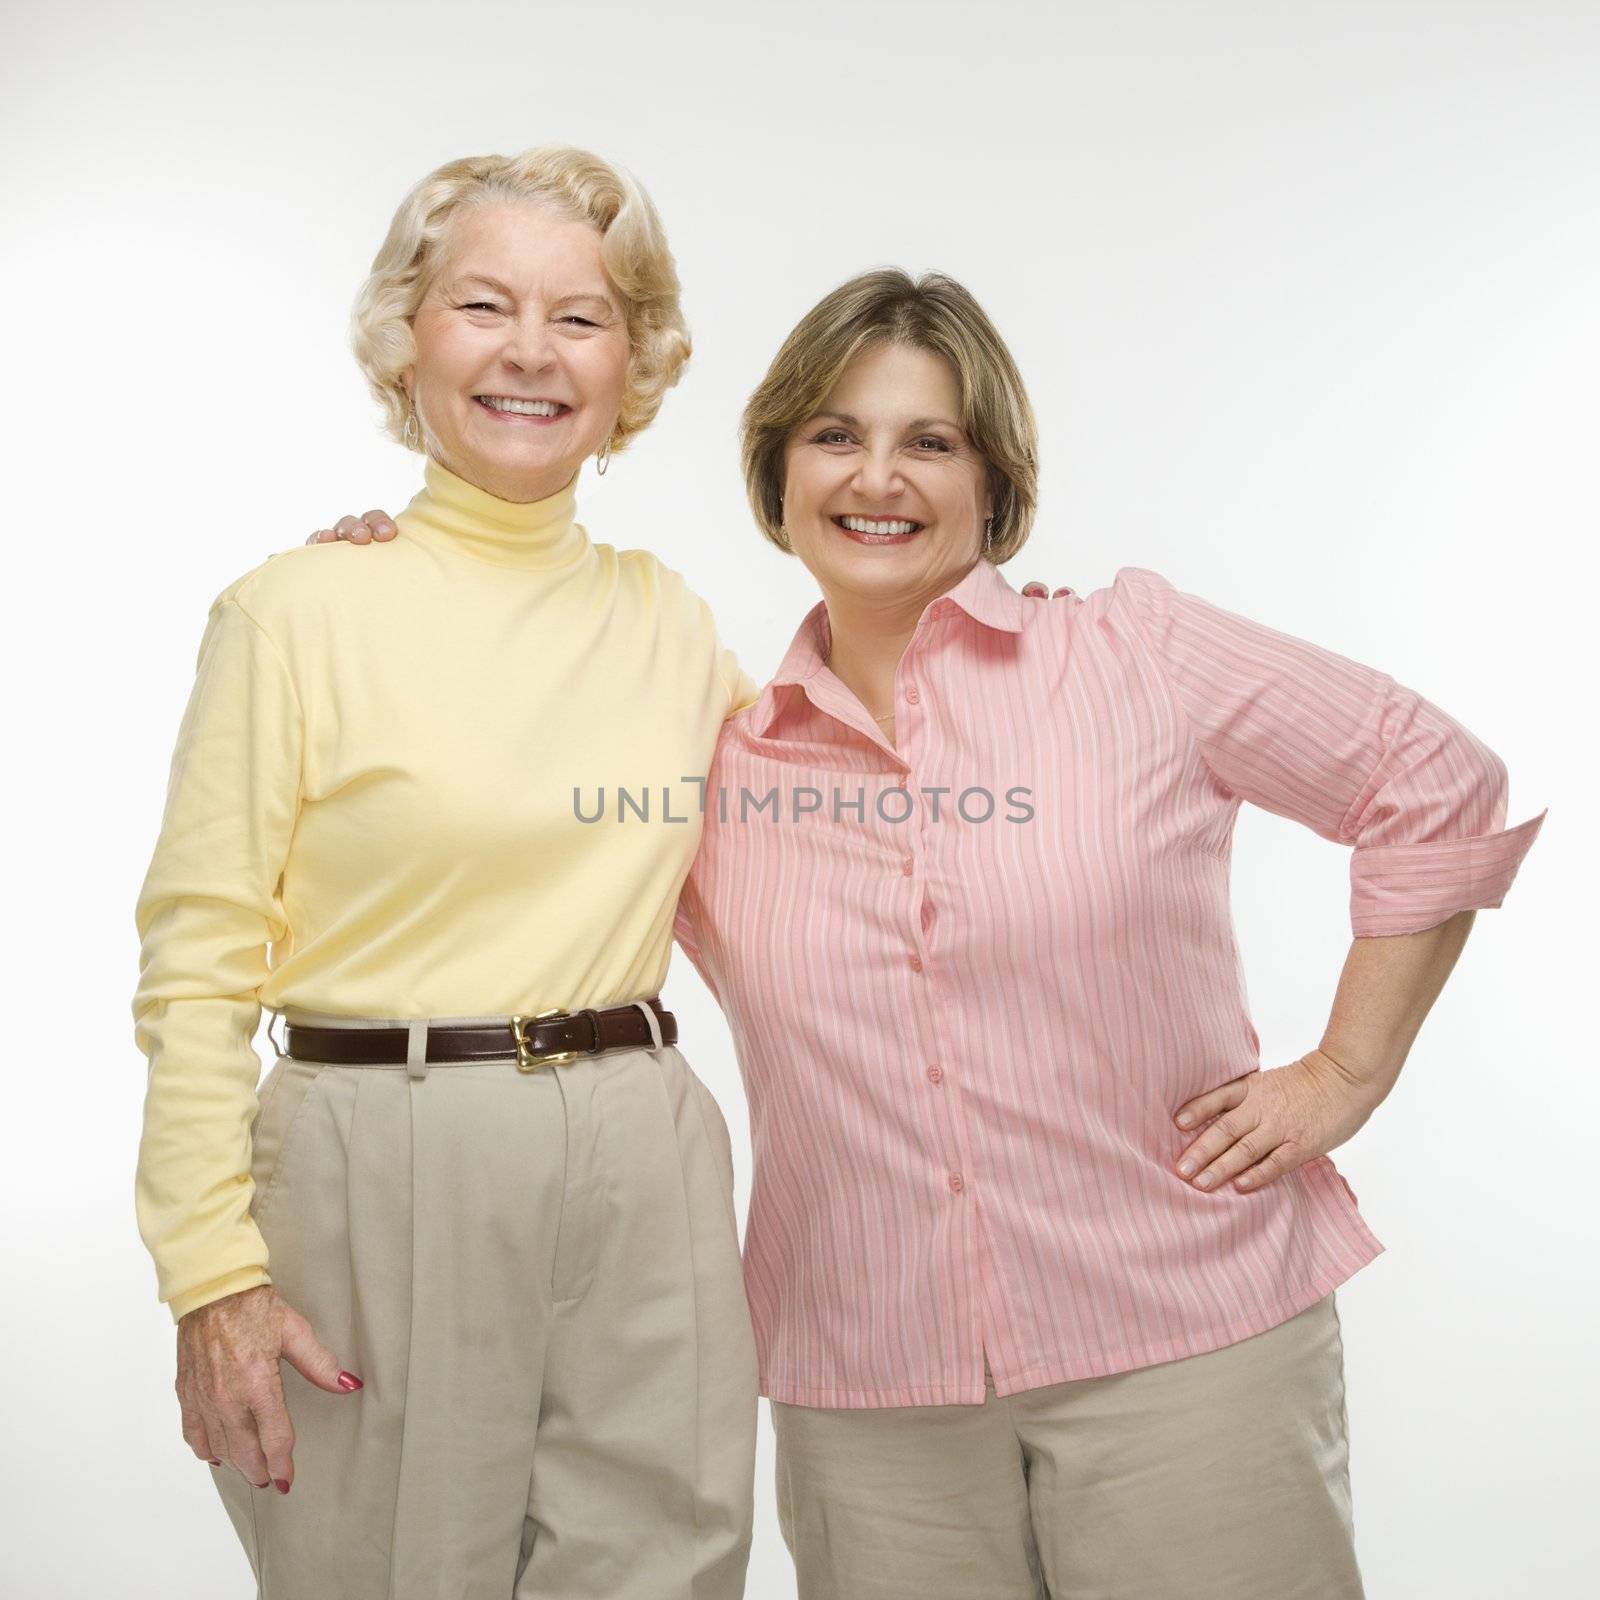 Caucasian senior woman and middle aged woman smiling with arms around each other.